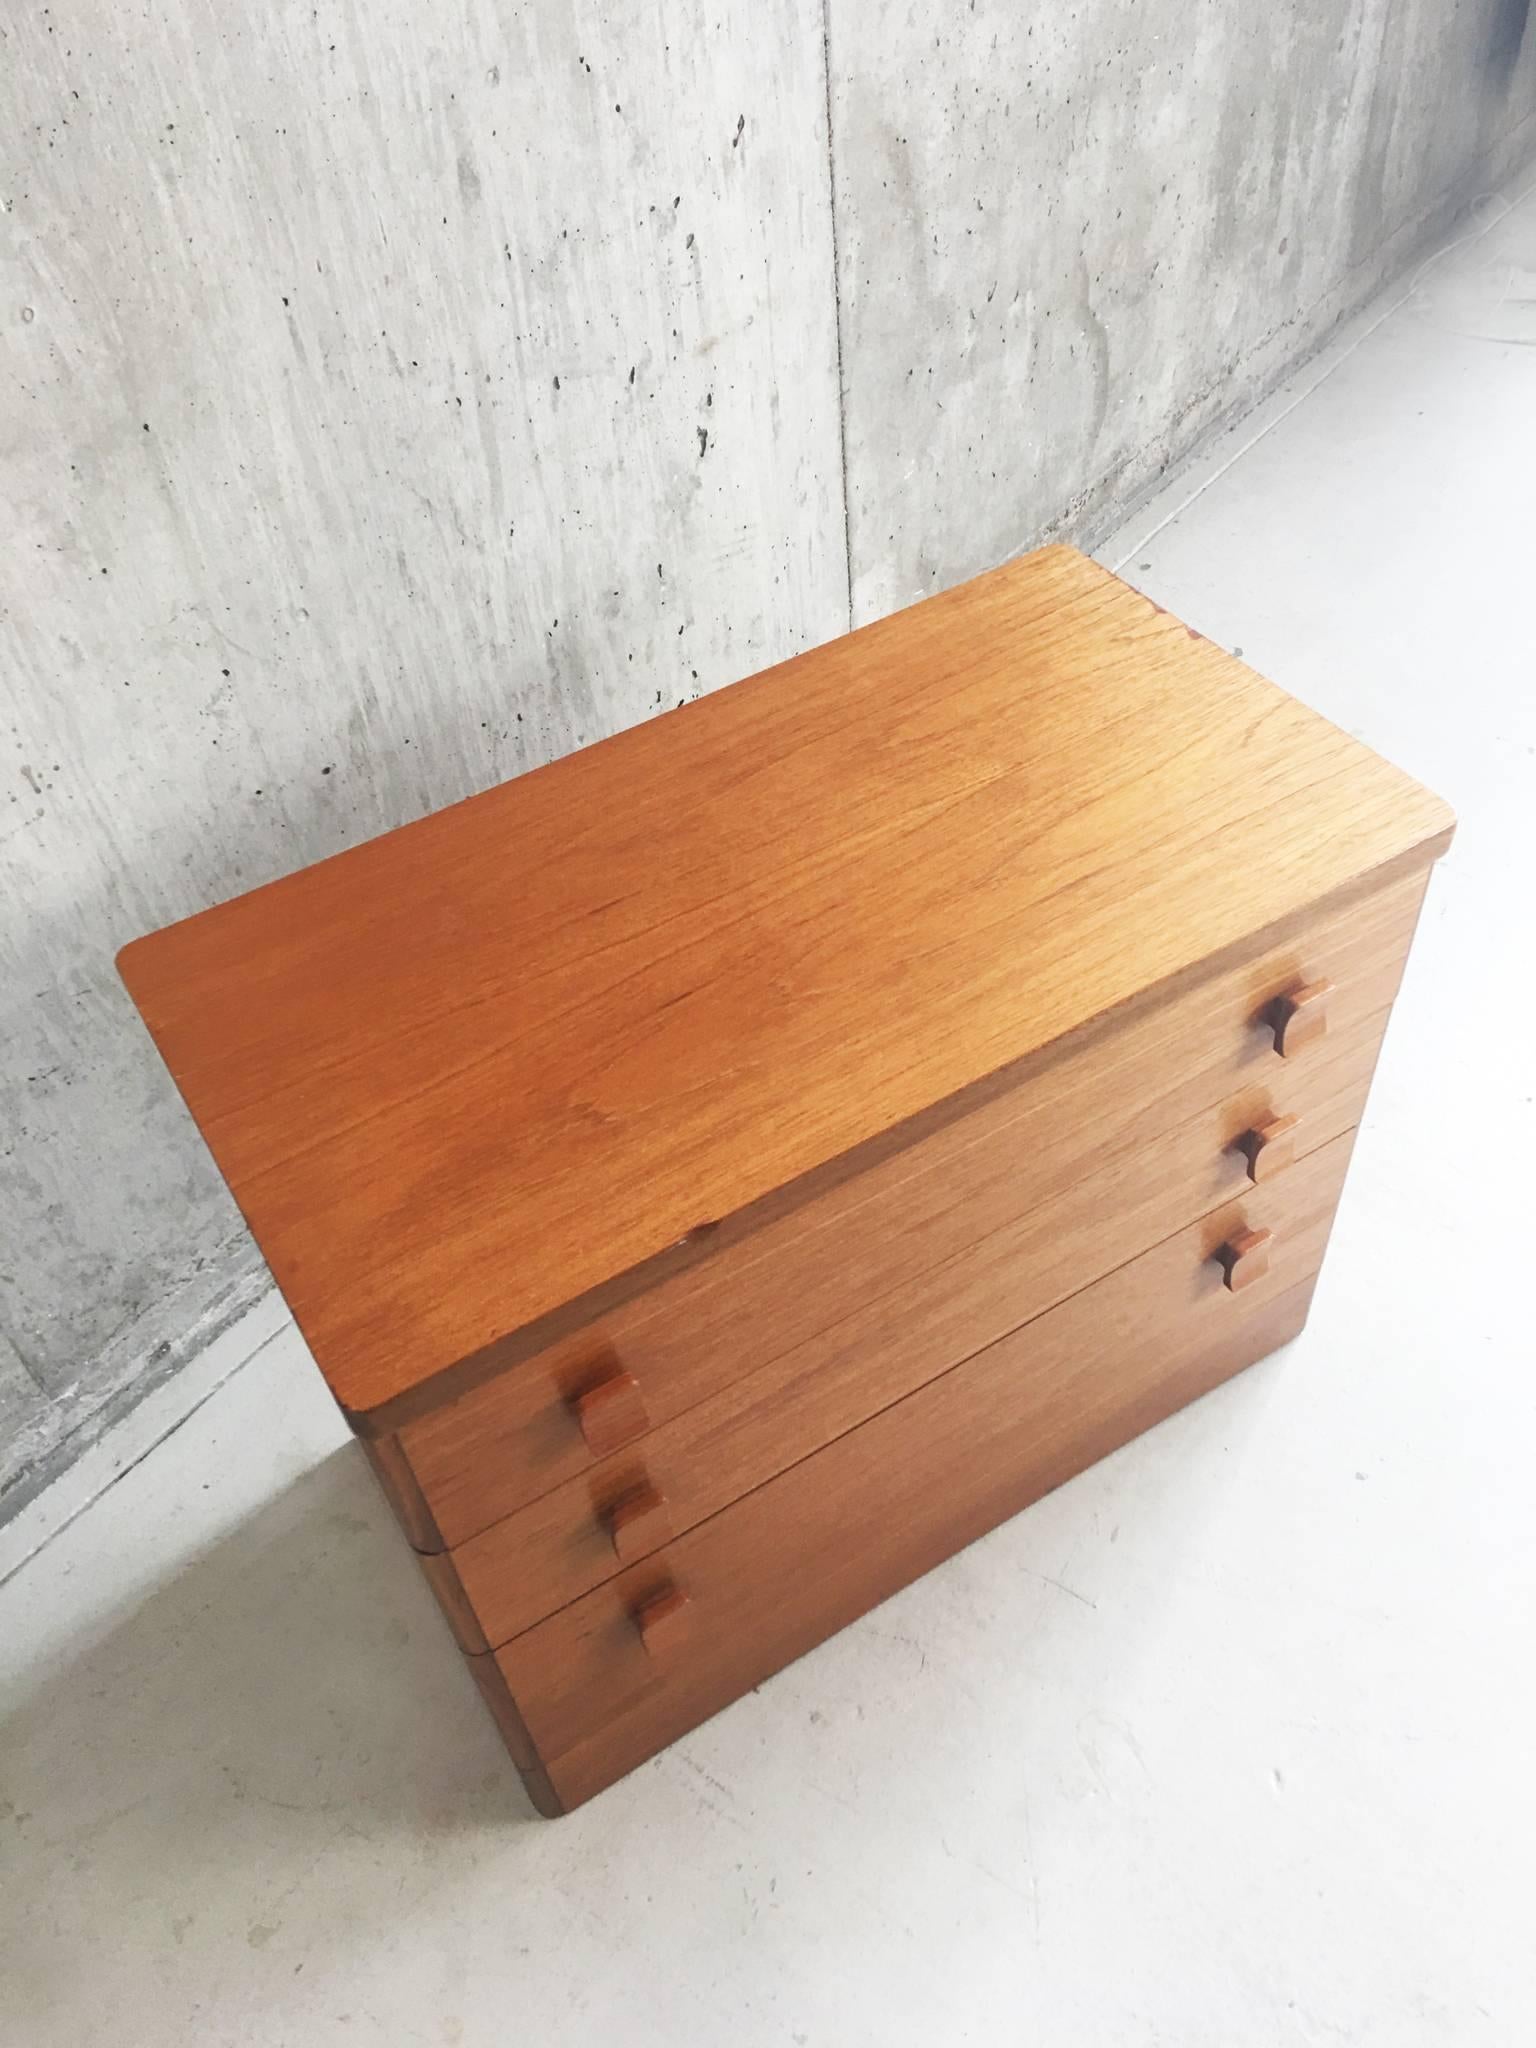 Stag Furniture was a mass market British manufacturer that made some outstanding modern designs in the 1960s and 1970s. They employed John and Sylvia Reid as design consultants. This chest of drawers is from the Cantata range they designed and